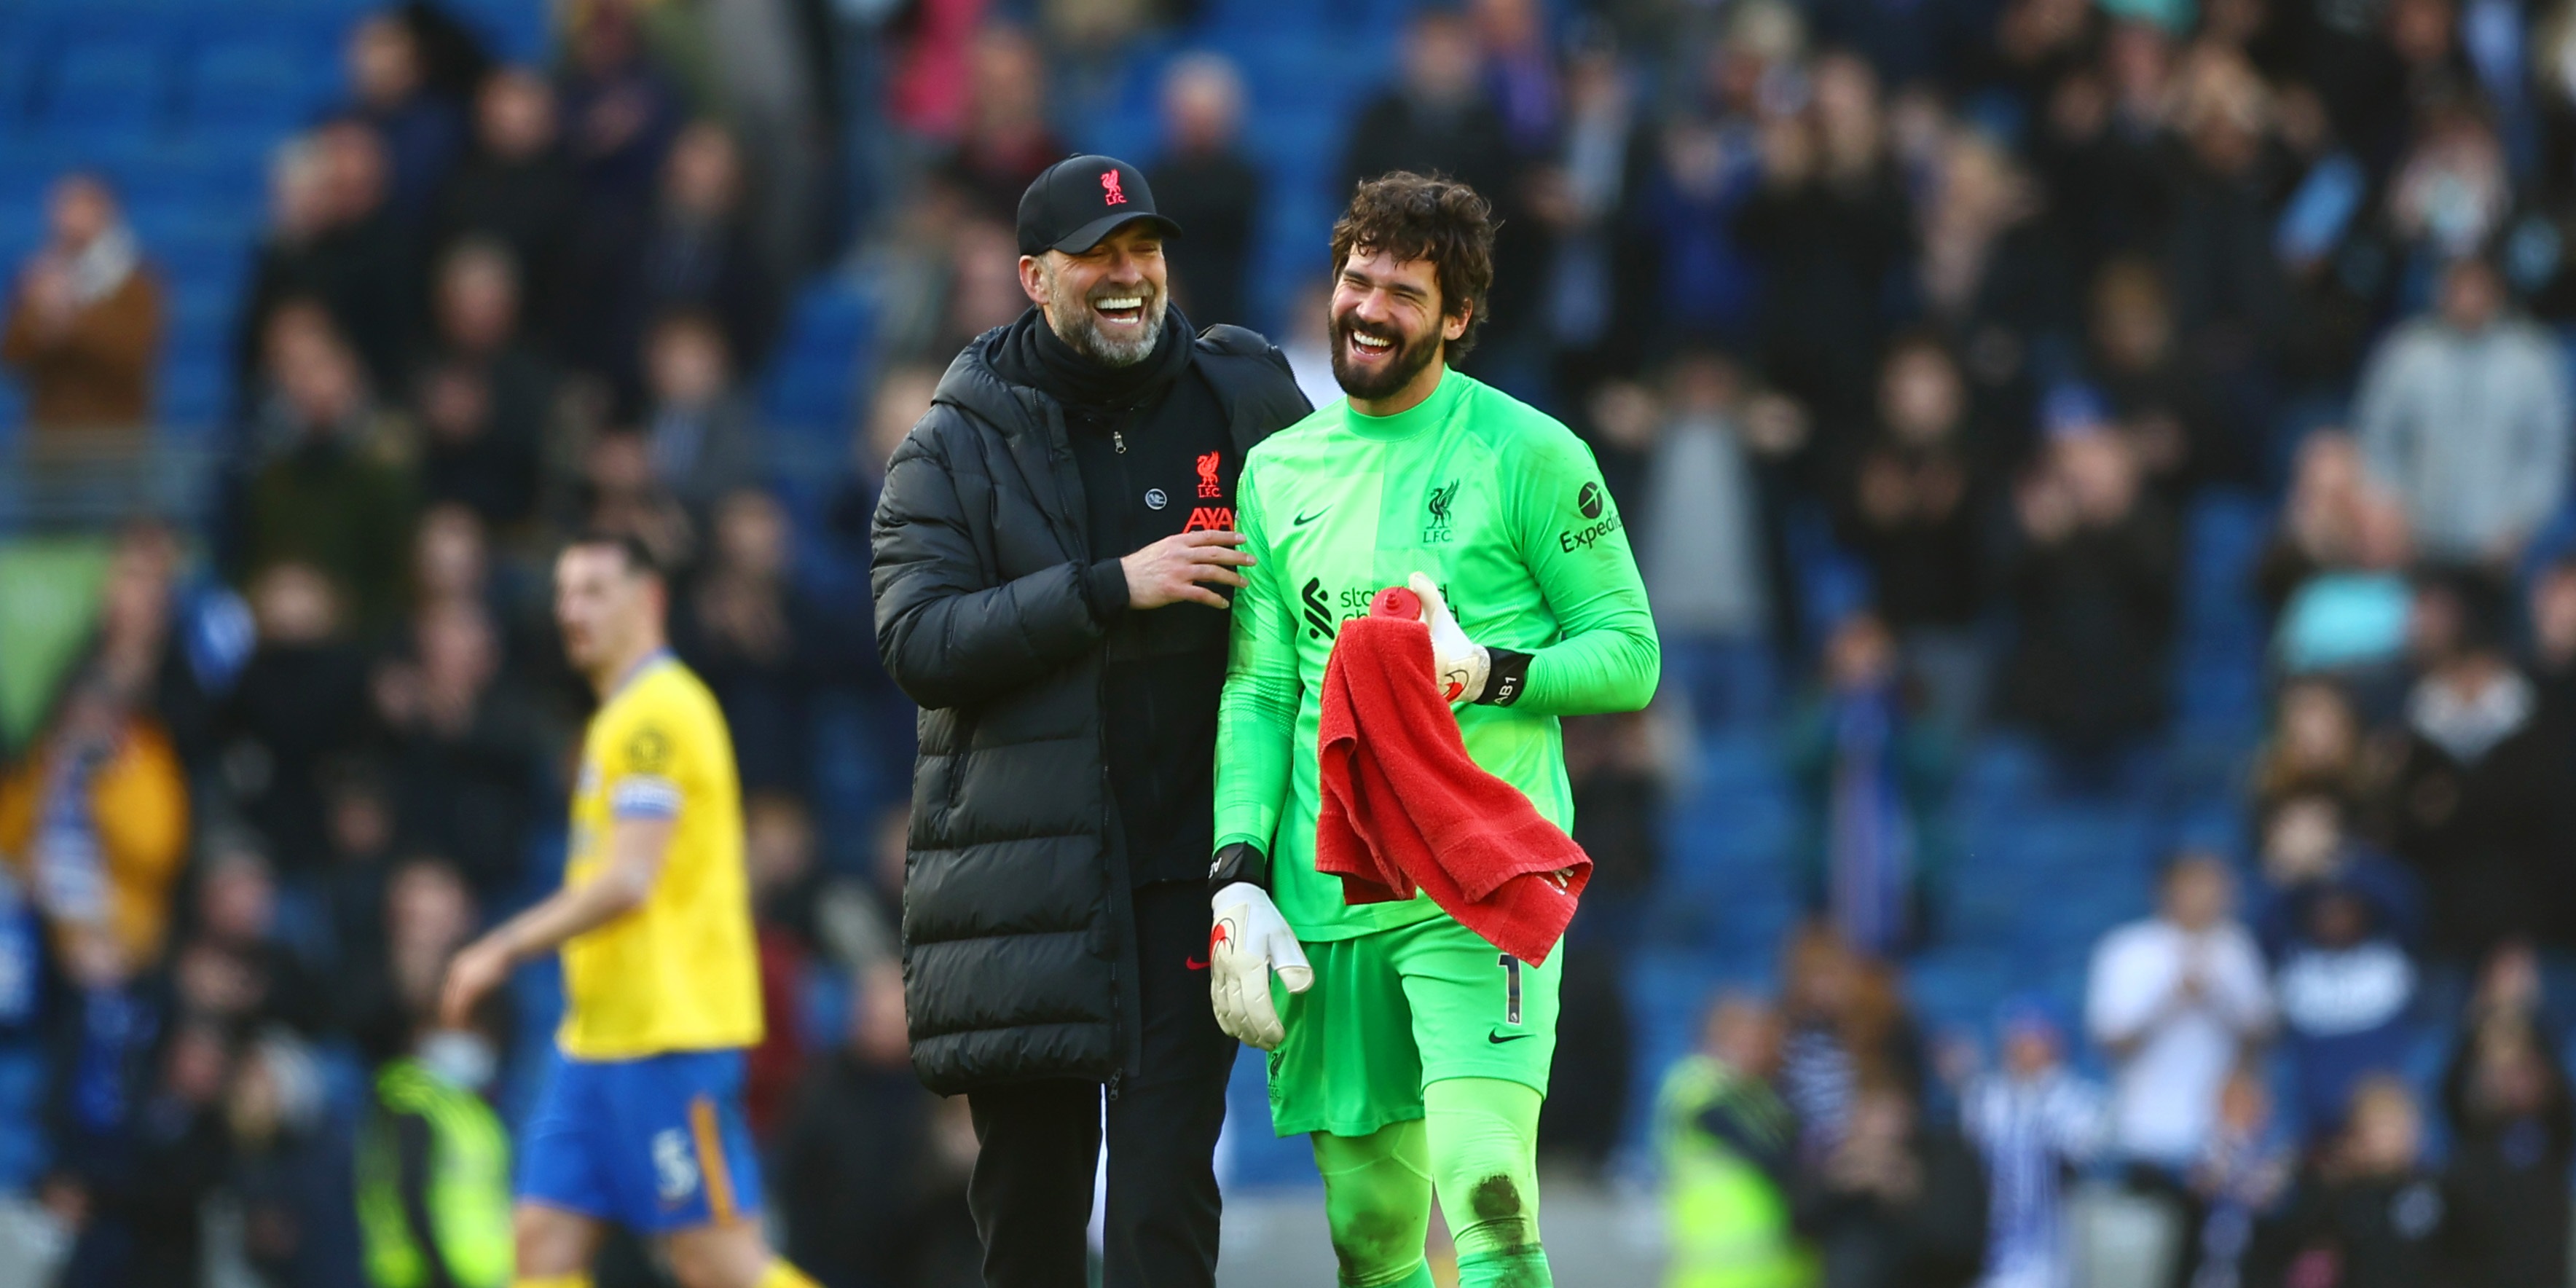 Jurgen Klopp confirms Alisson Becker will miss Saturday’s clash with Manchester City and reveals expected return date